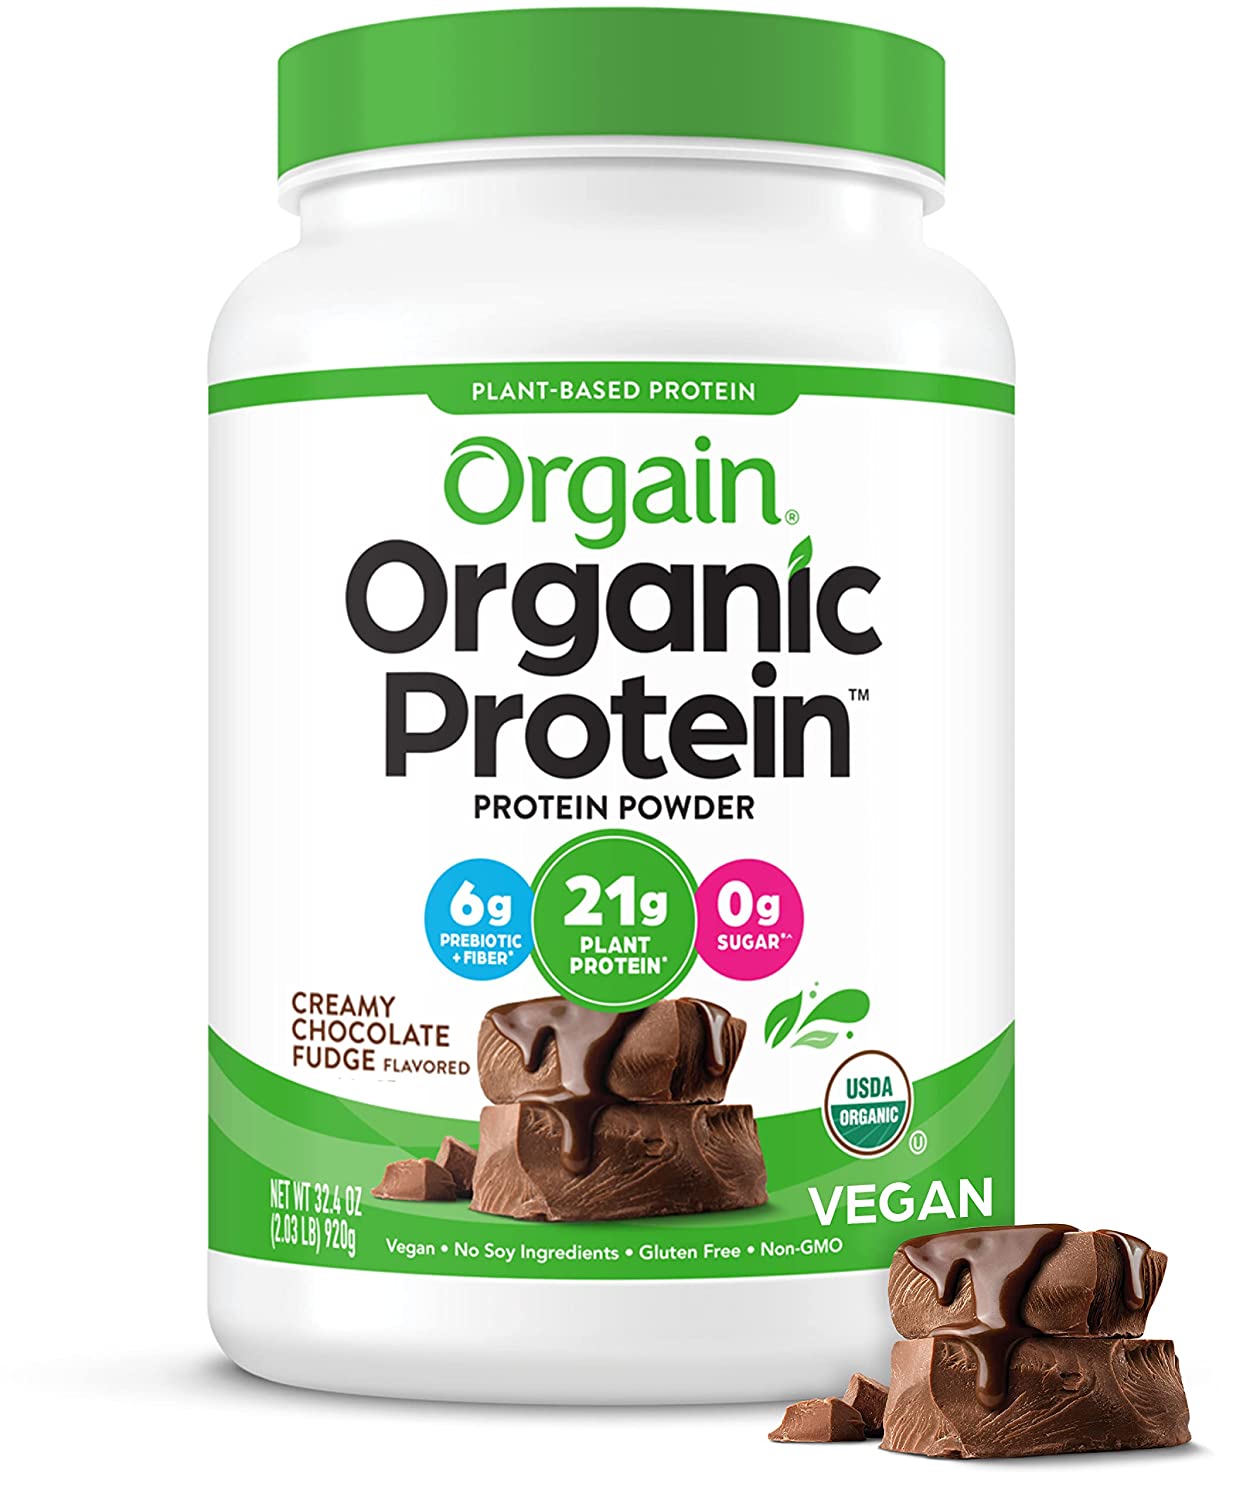 Orgain Grass Fed Clean Protein Shake Creamy Chocolate Fudge Meal  Replacement 11 oz 12 Count Organic